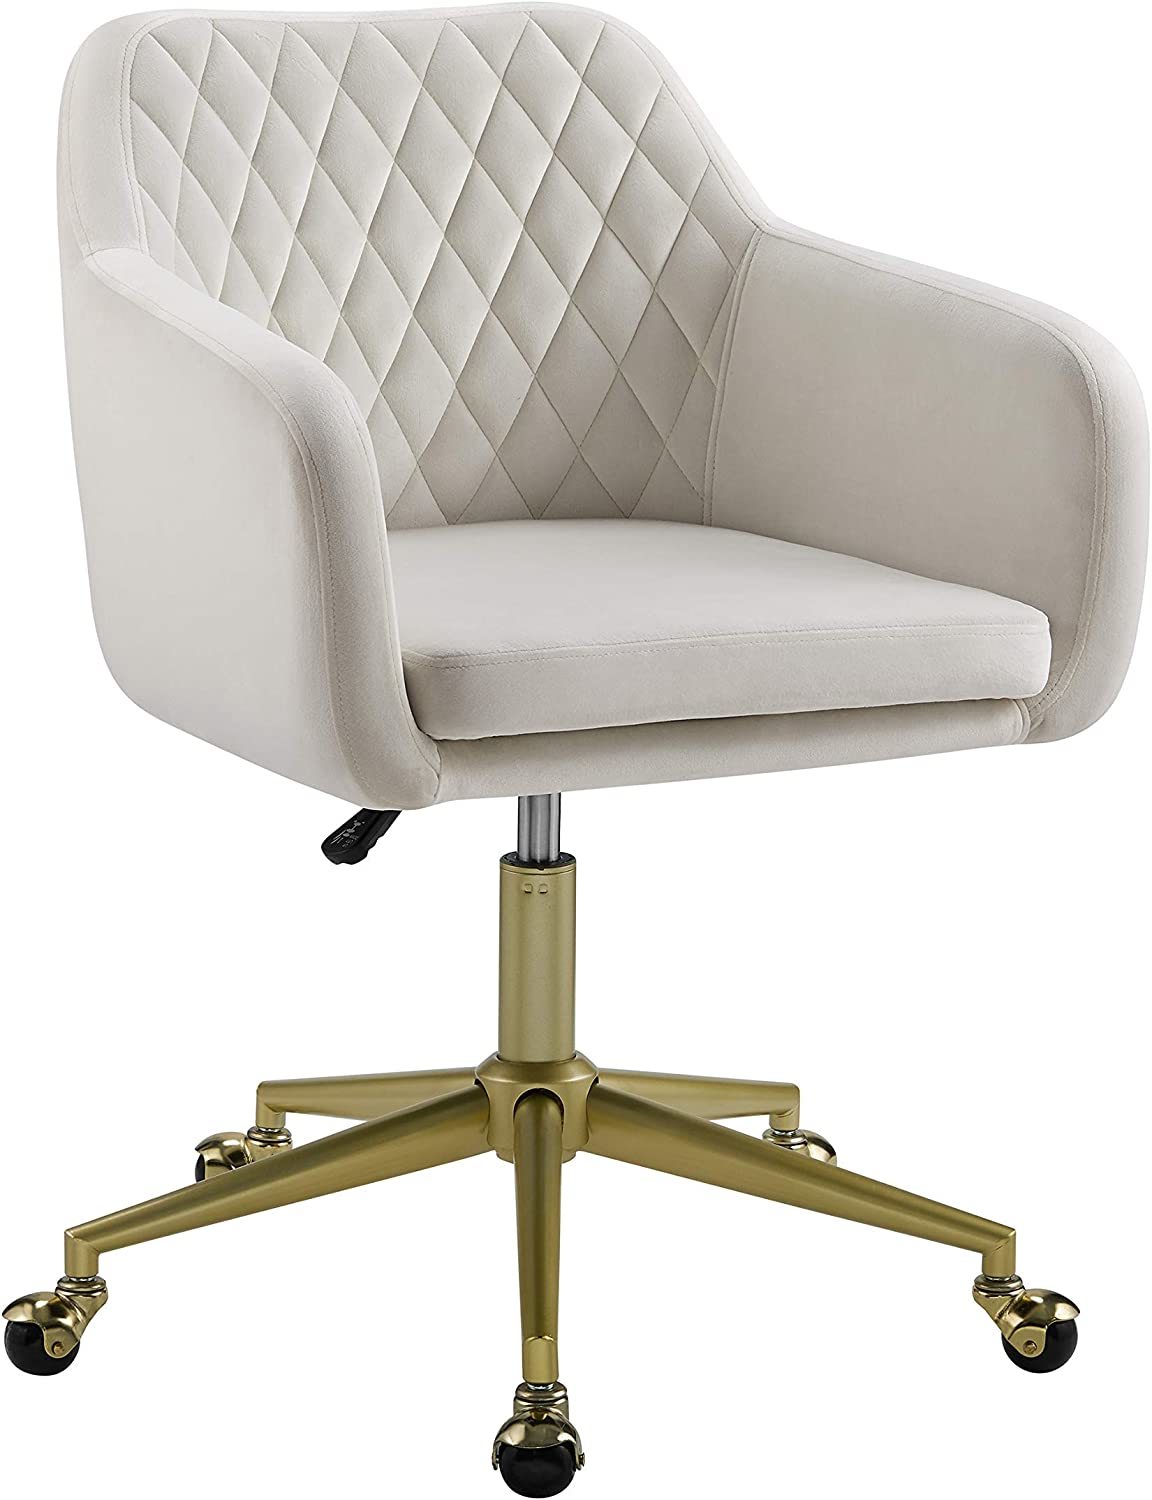 Brooklyn Office Chair In White With Quilting By Linon. - $227.97